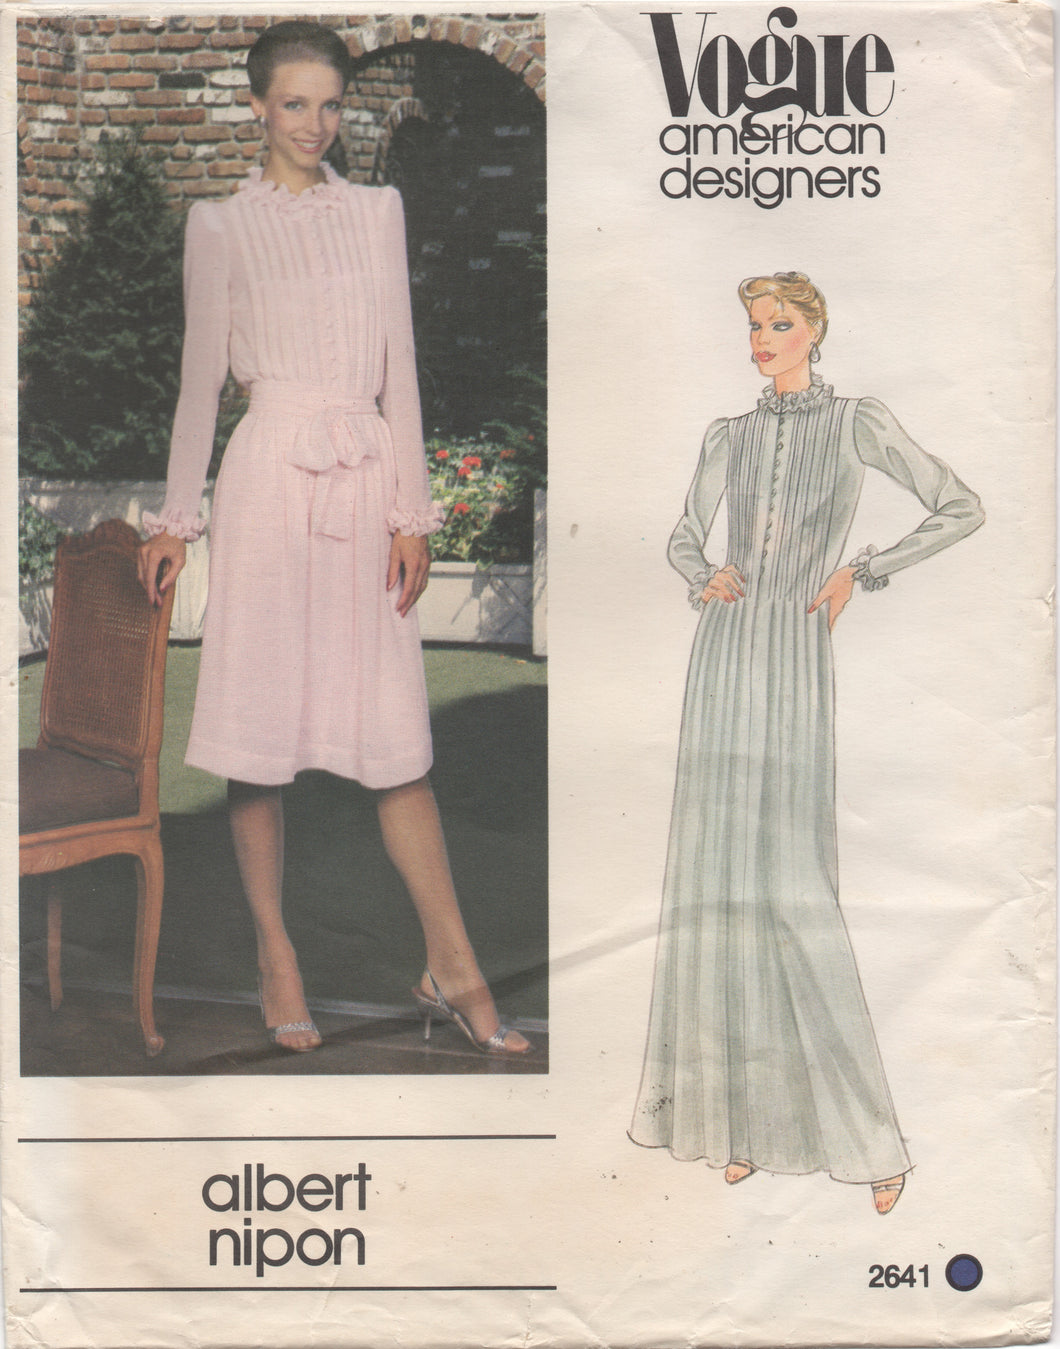 1980's Vogue American Designer Button Front Pin Tucked Dress with Ruffle Collar - Albert Nipon - Bust 34